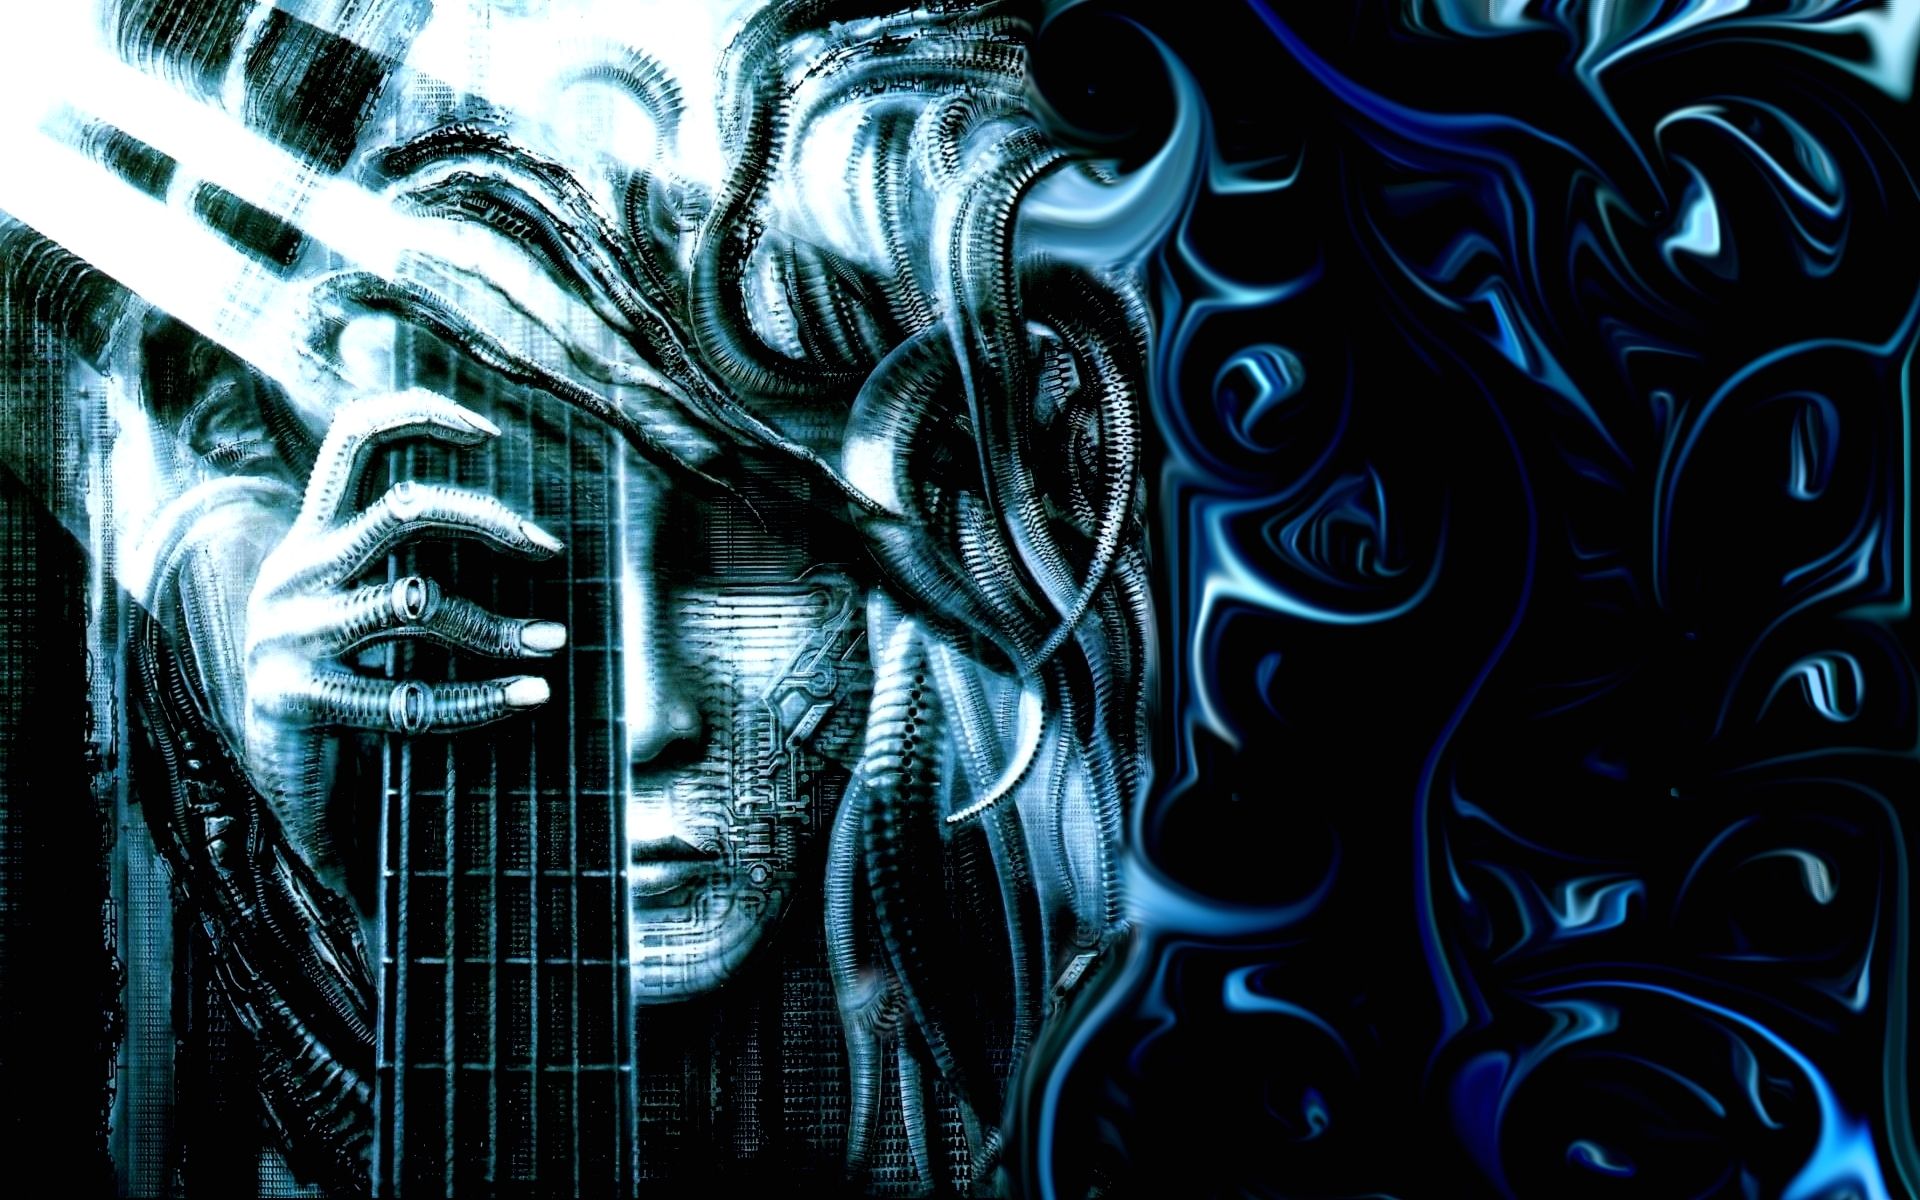 Wallpaper By H R Giger